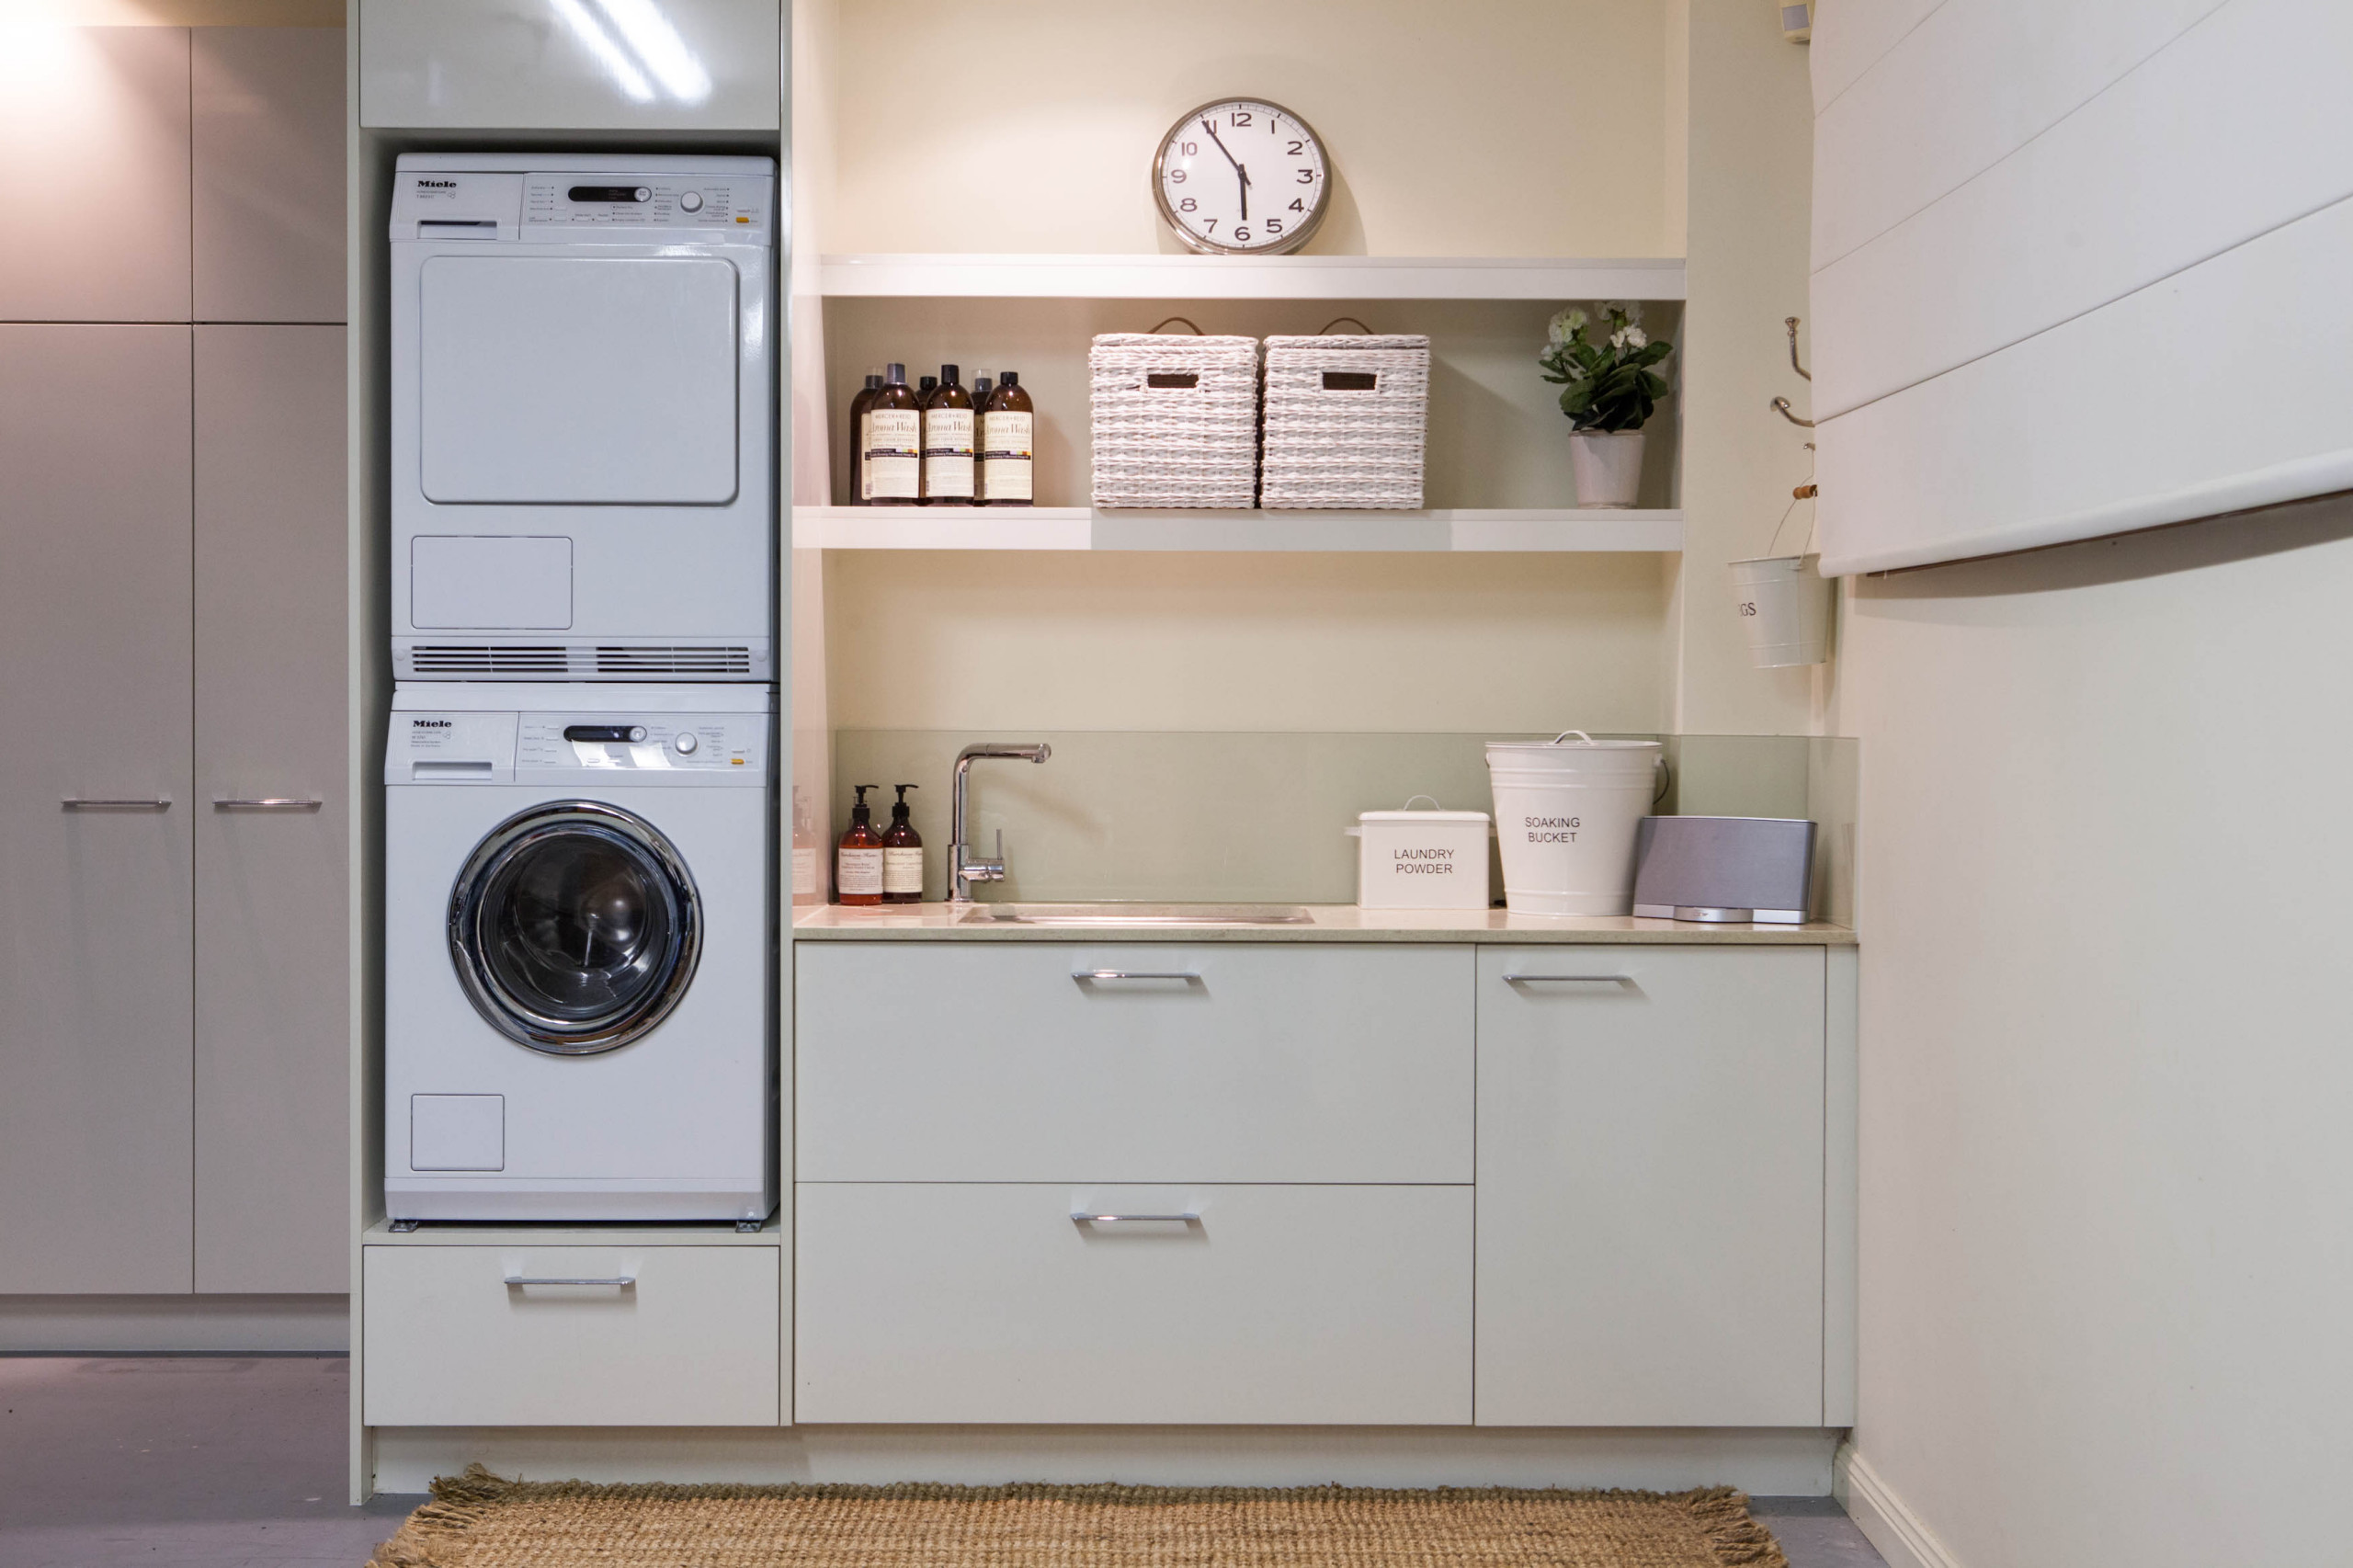 Miele Washer And Dryer - Photos & Ideas | Houzz